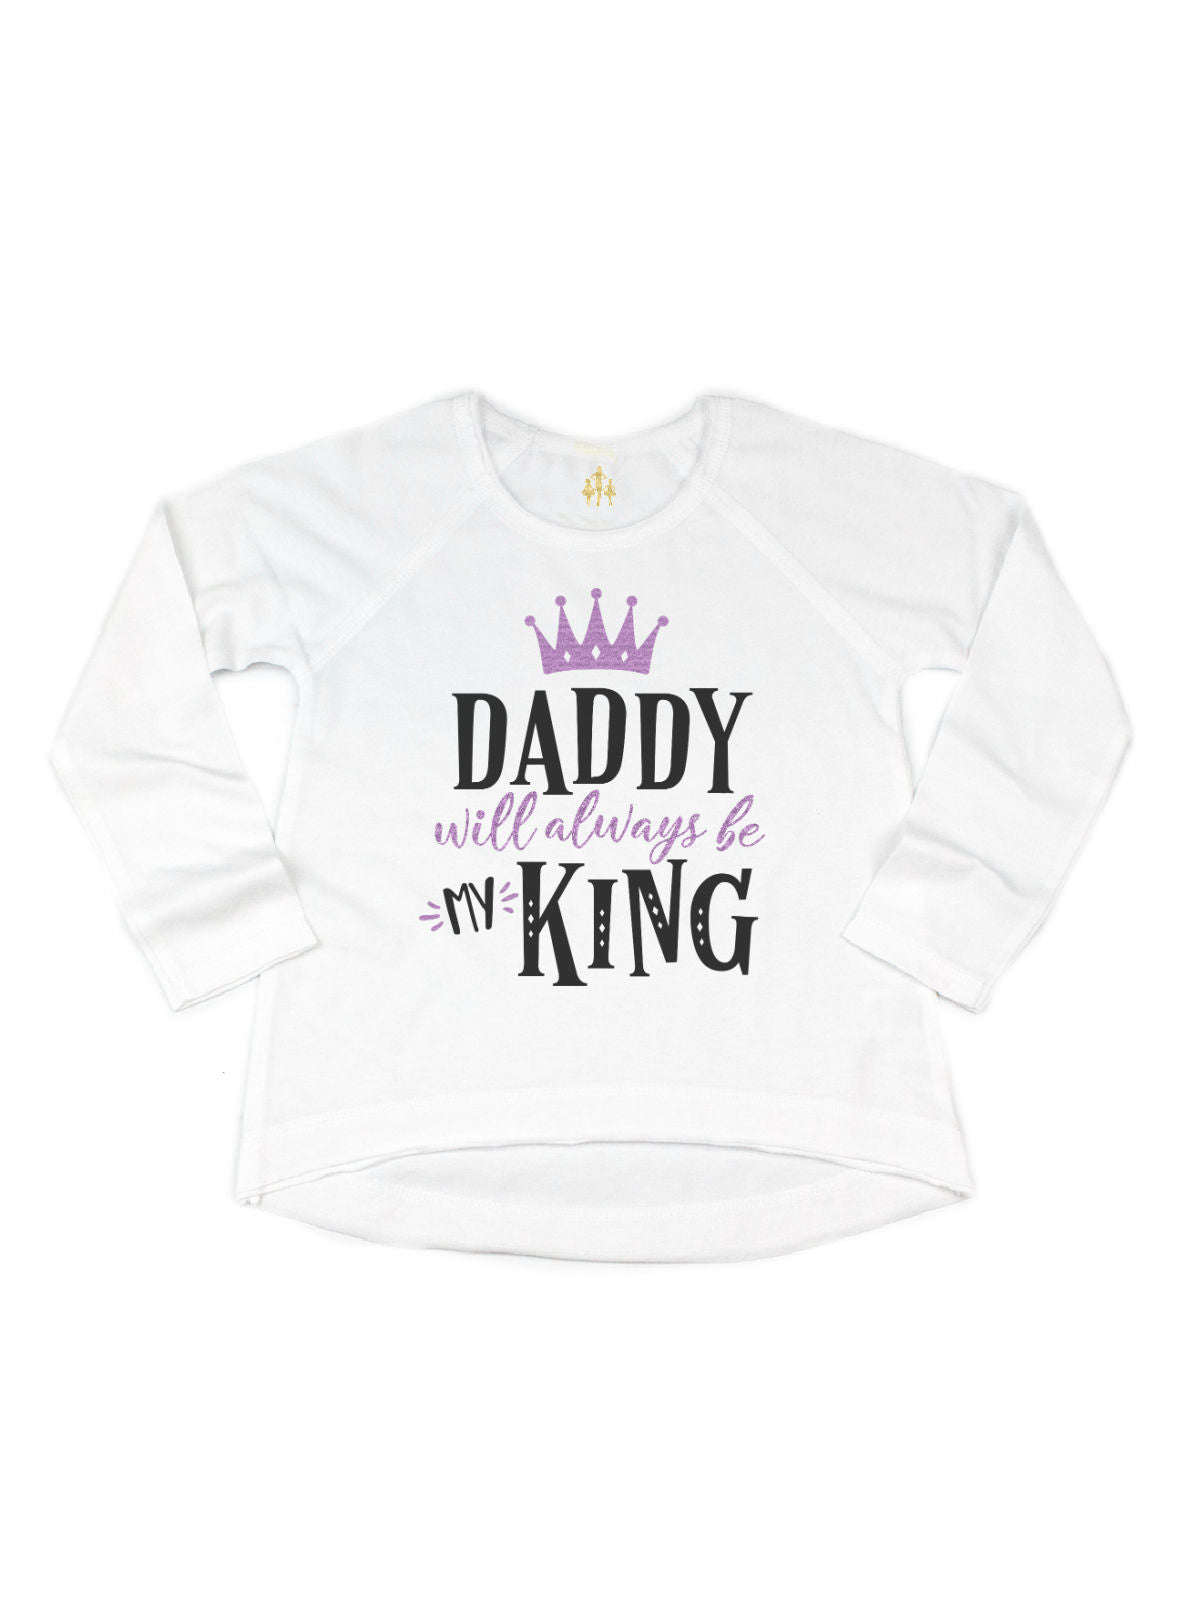 Daddy Will Always Be My King Purple and Black Girls Shirt